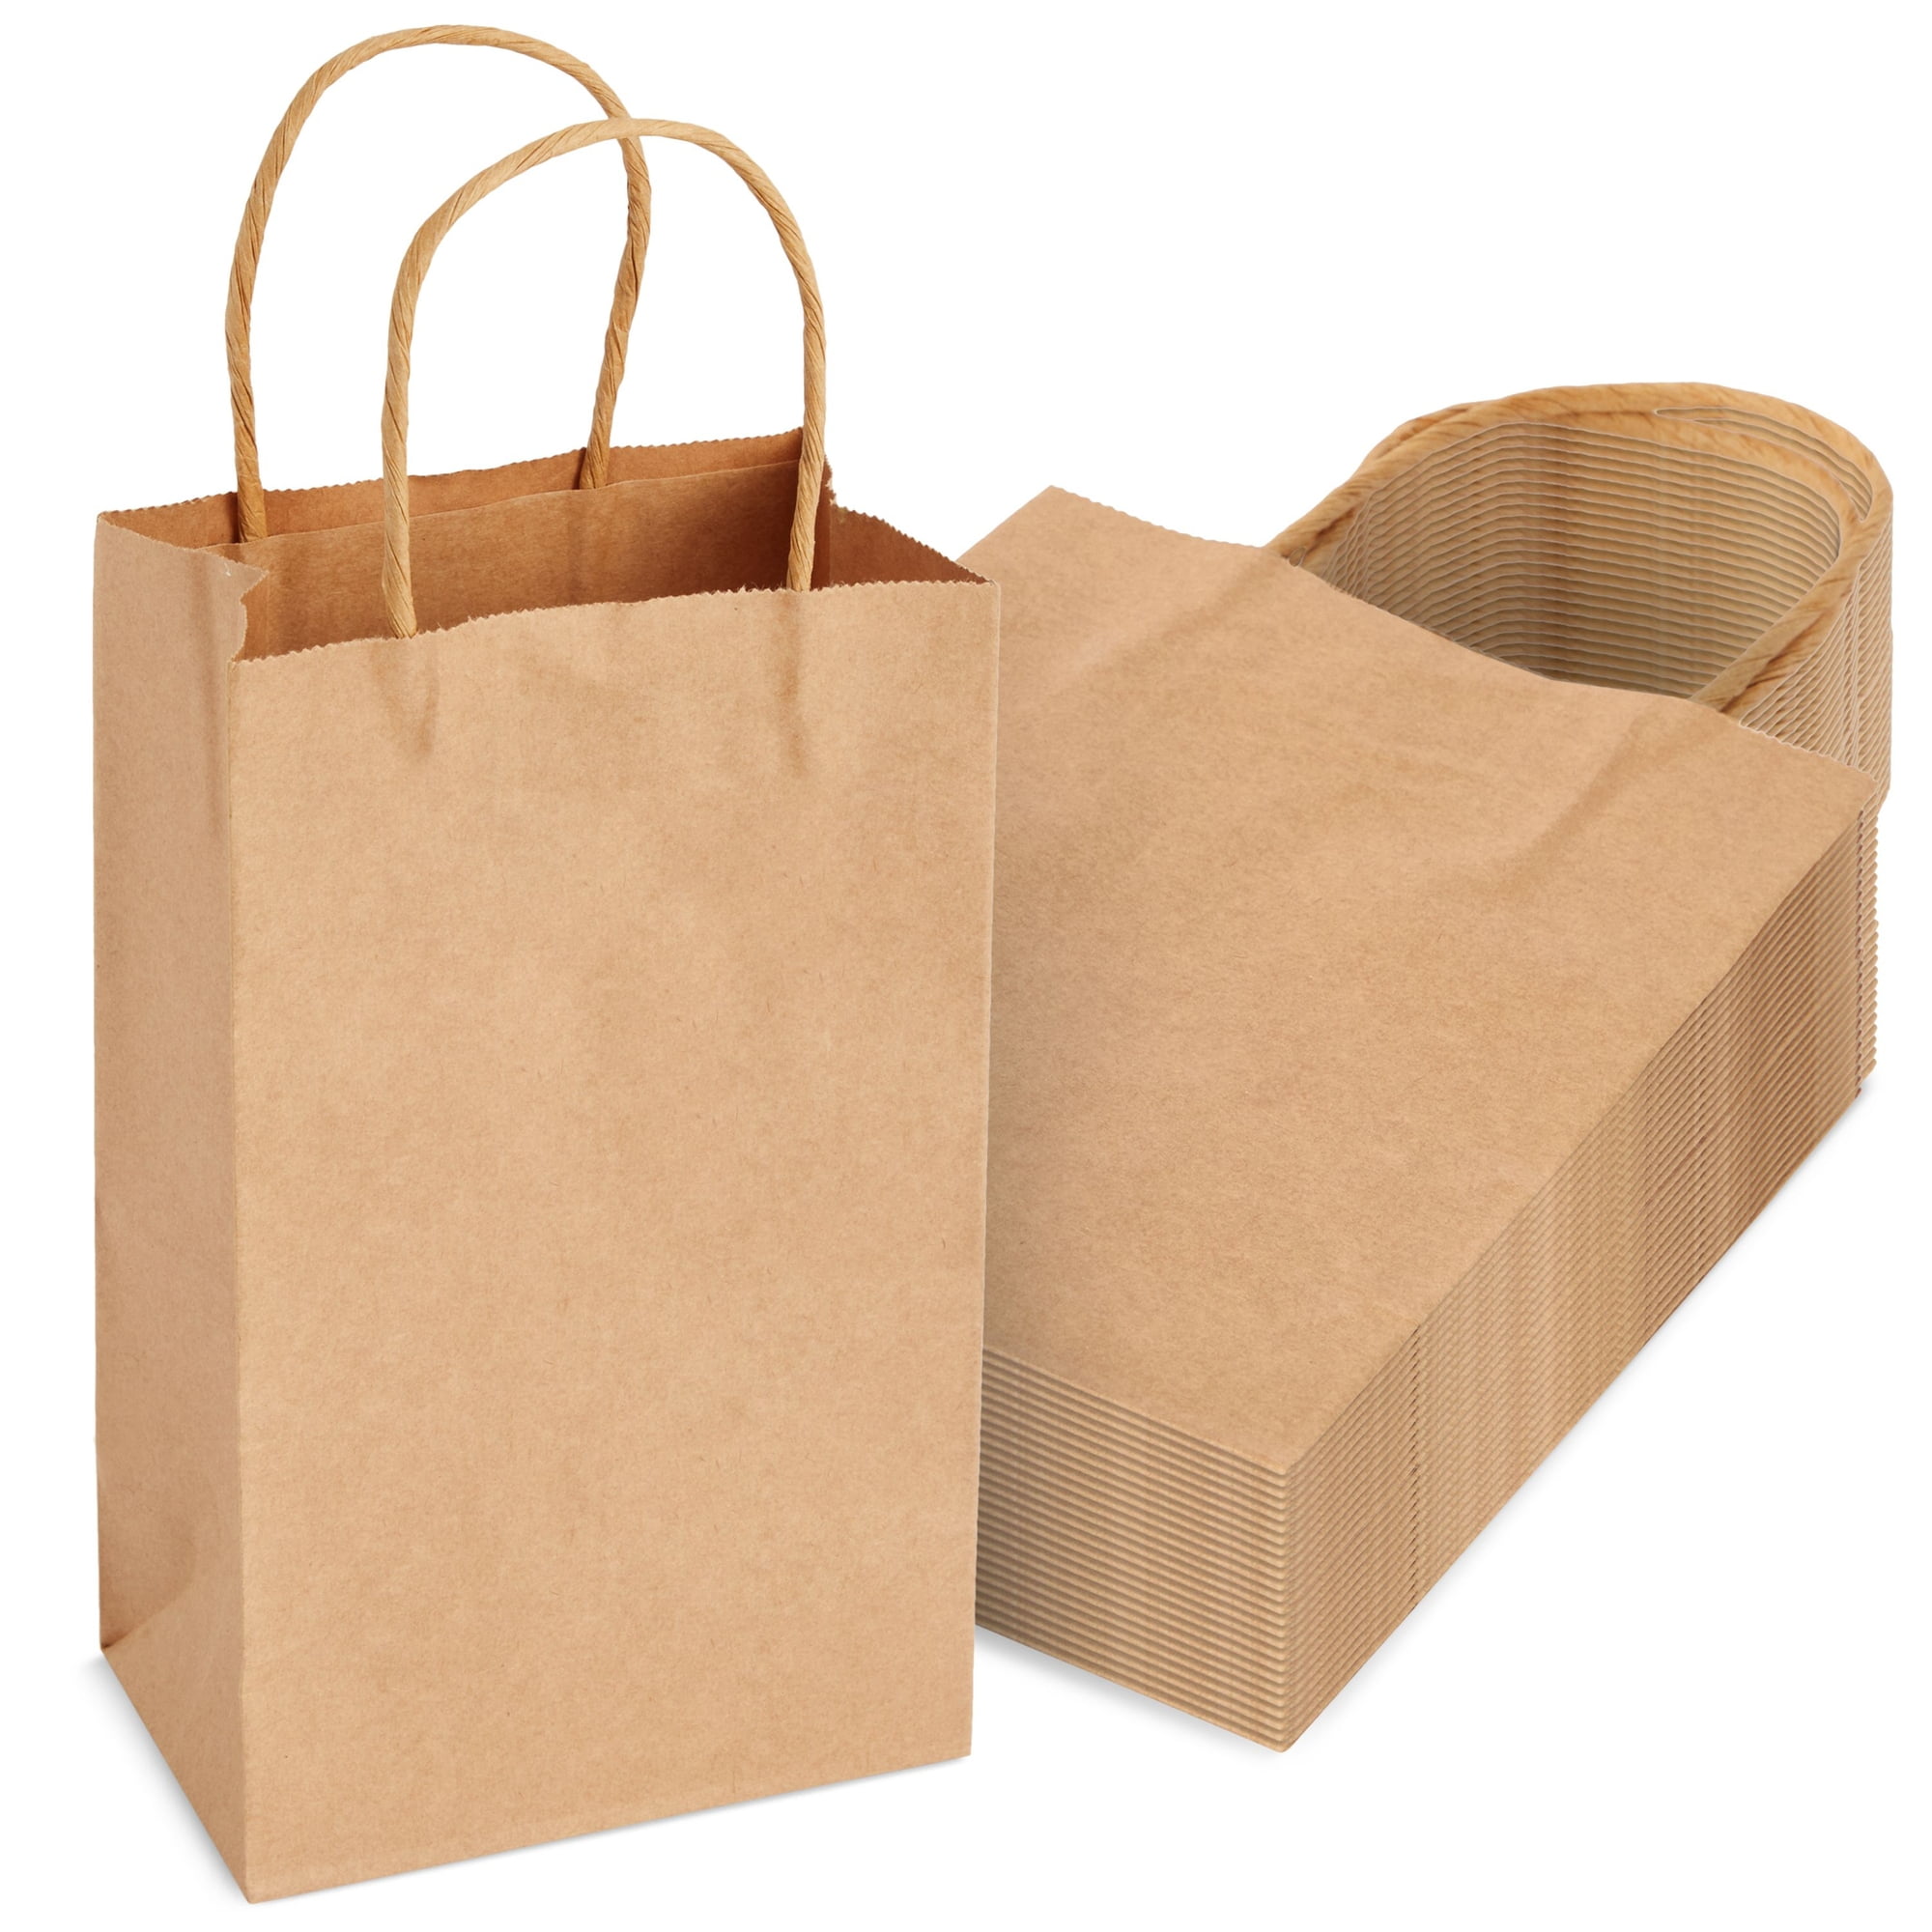  MESHA Paper Gift Bags 5.25x3.75x8 White Small Paper Bags with Handles  Bulk,100 Pcs Kraft Paper Bags for Small Business,Birthday Wedding Party  Favor Bags,Paper Shopping Bags : Health & Household